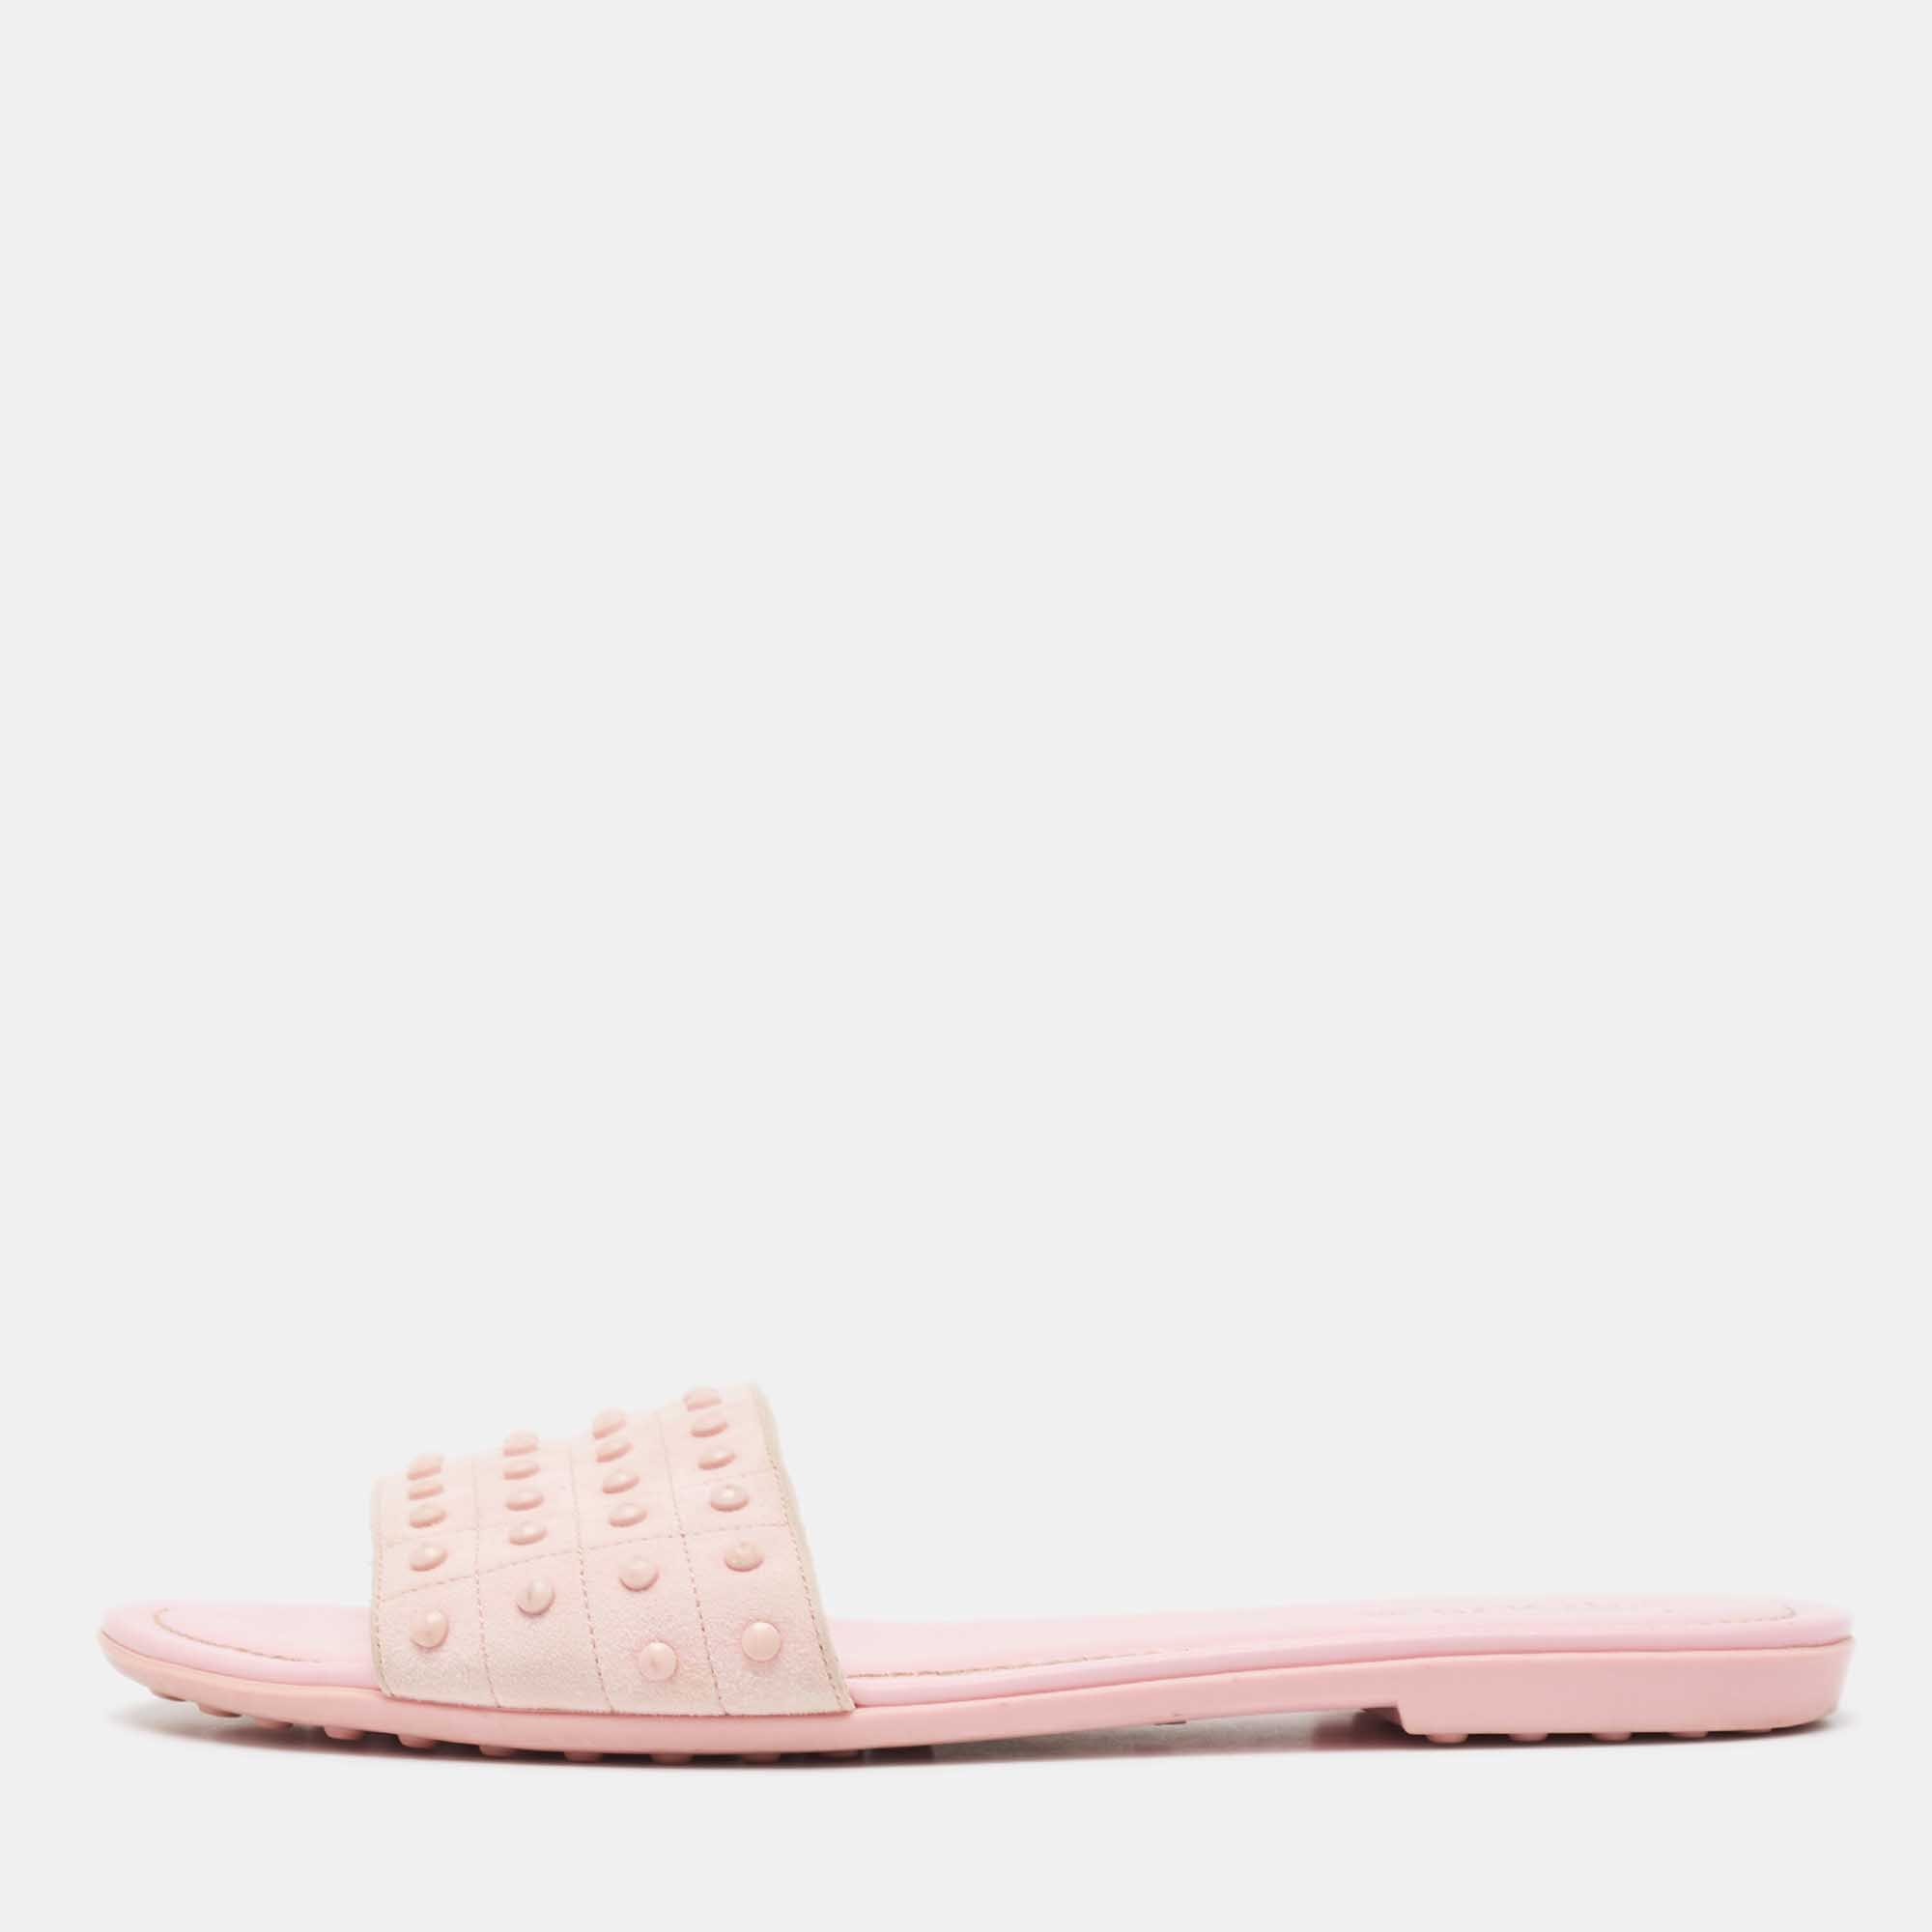 Tod's pink suede studded flat slides size 38.5